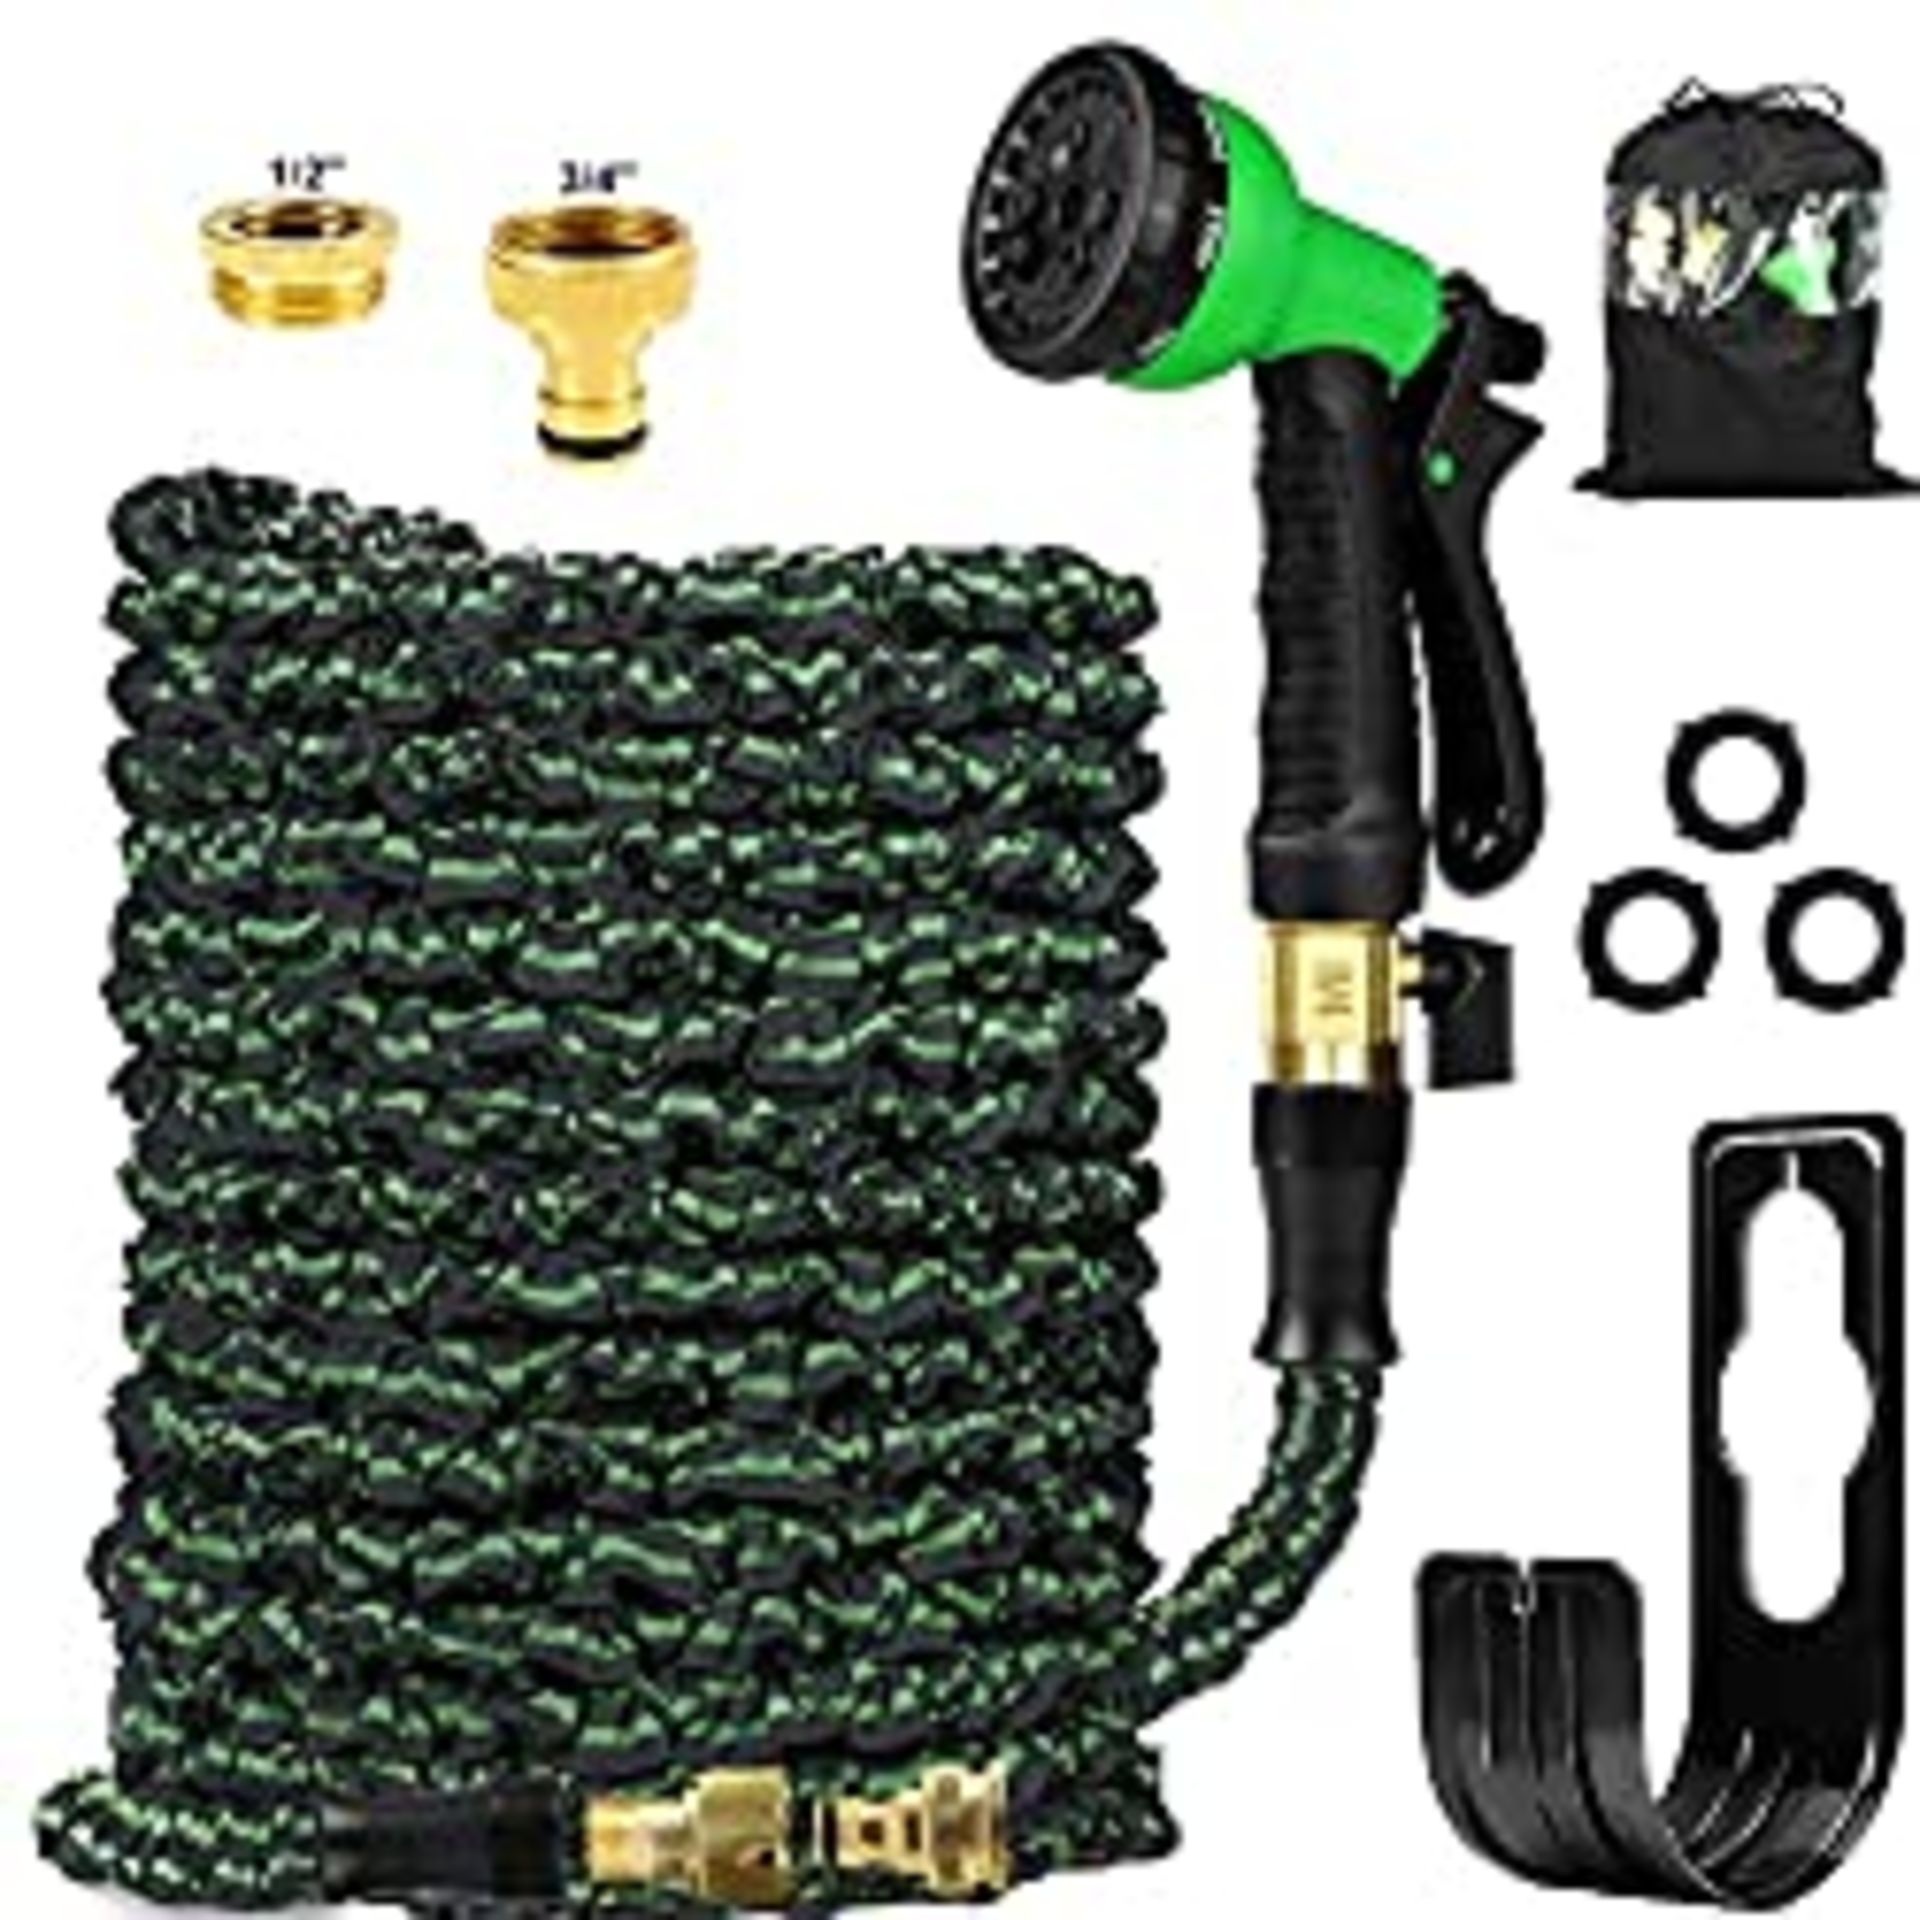 RRP £20.98 Expandable Garden Hose 100FT Expanding Hose Pipe with 8 Function Hose Spray Gun